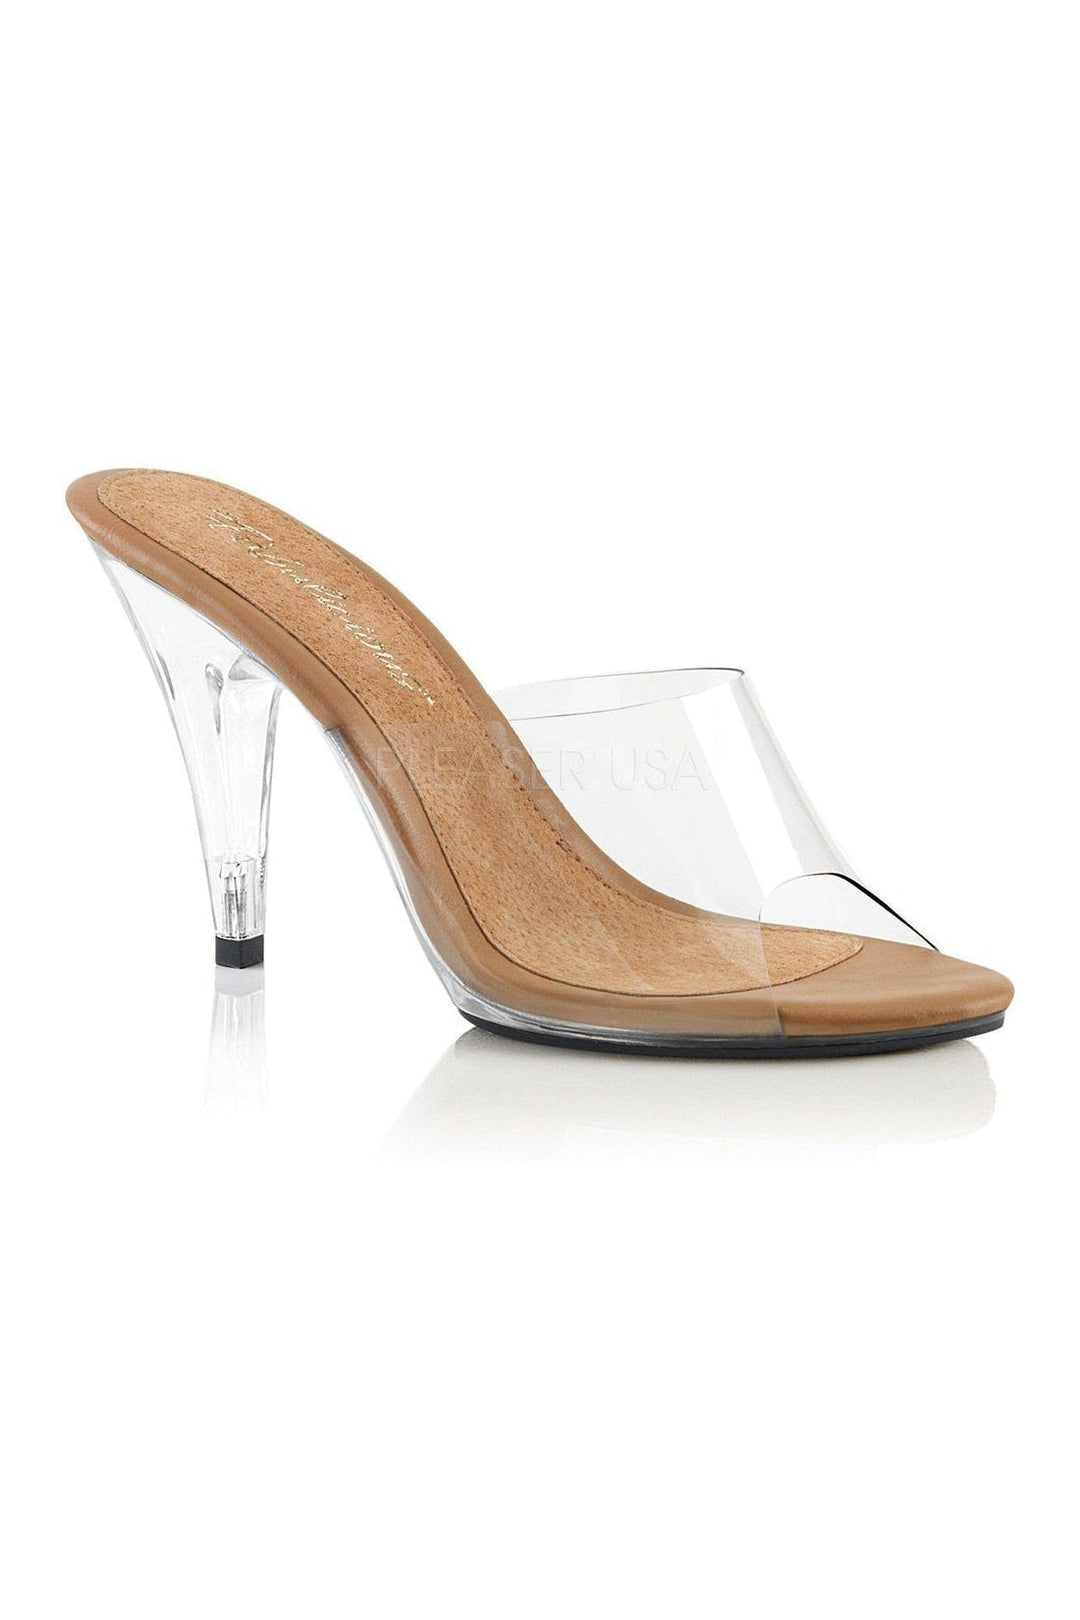 CARE401 Slide | Clear Vinyl-Fabulicious-Clear-Slides-SEXYSHOES.COM